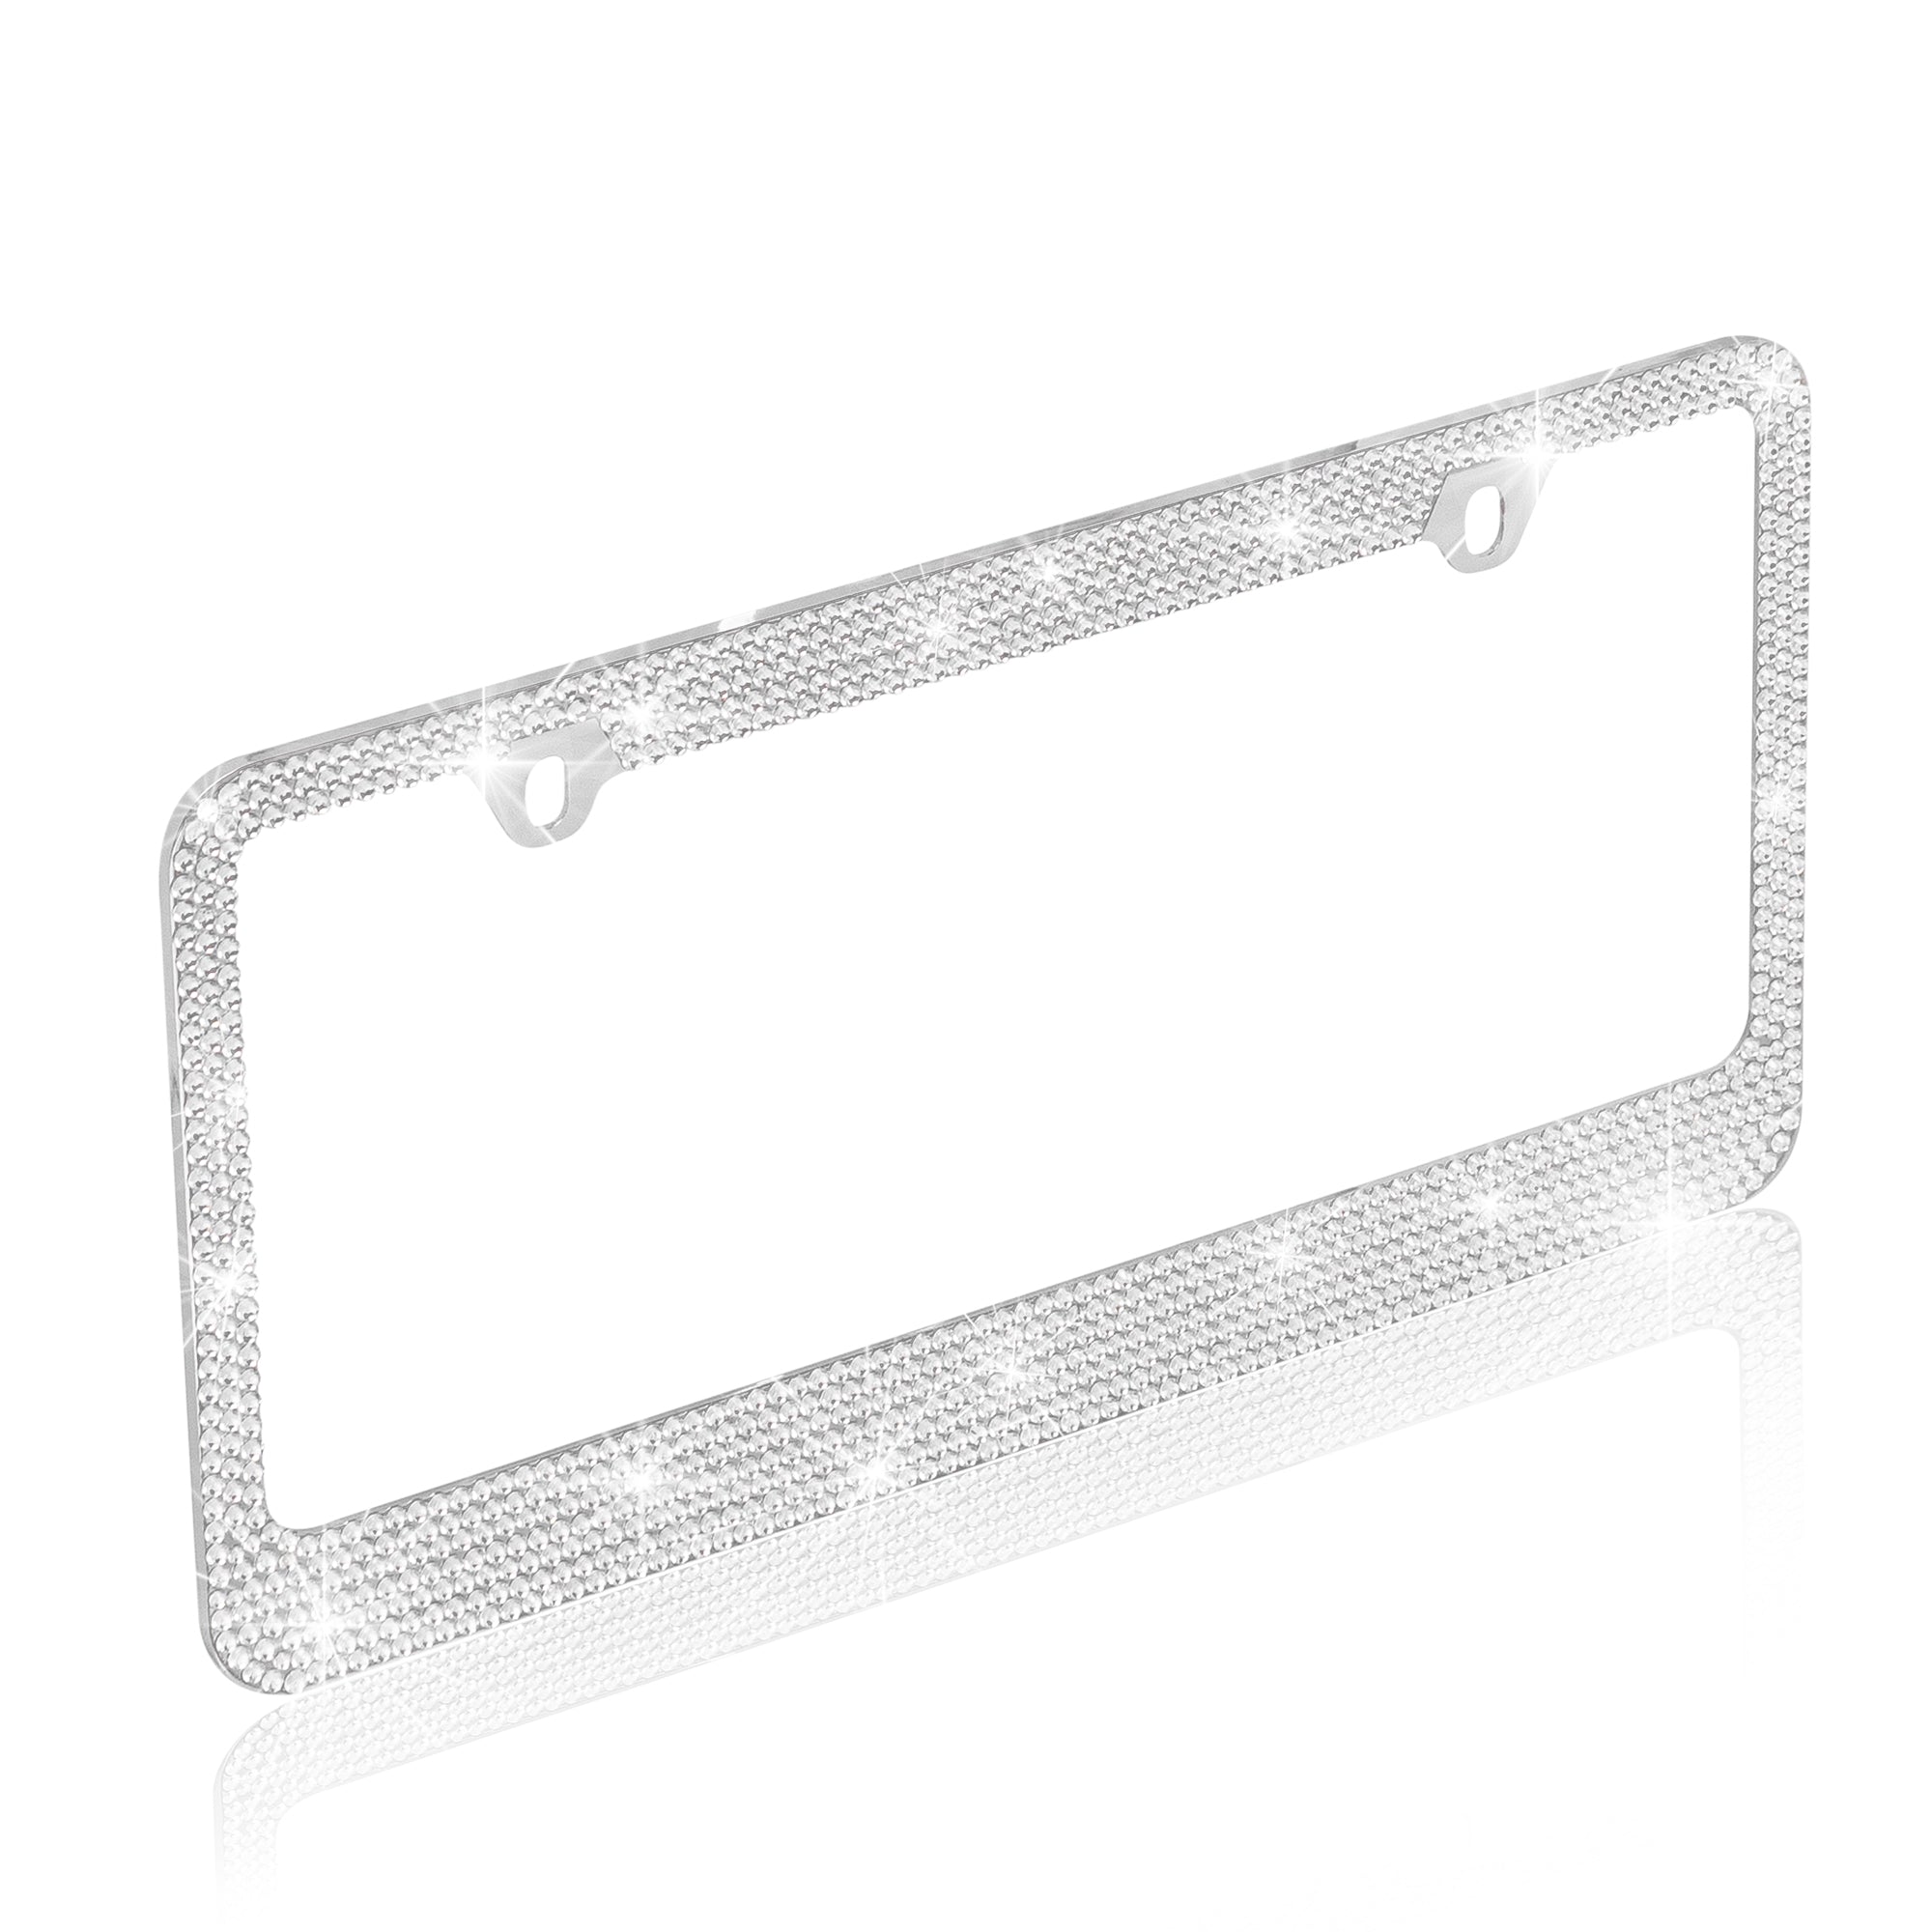 Stainless Steel Silver Sparkly Sparkling Diamond Crystal Bling Premium License Plate Frame Stainless Steel Metal Silver Rhinestone for Women Universal Size for Car Truck SUV (Pack of 2)